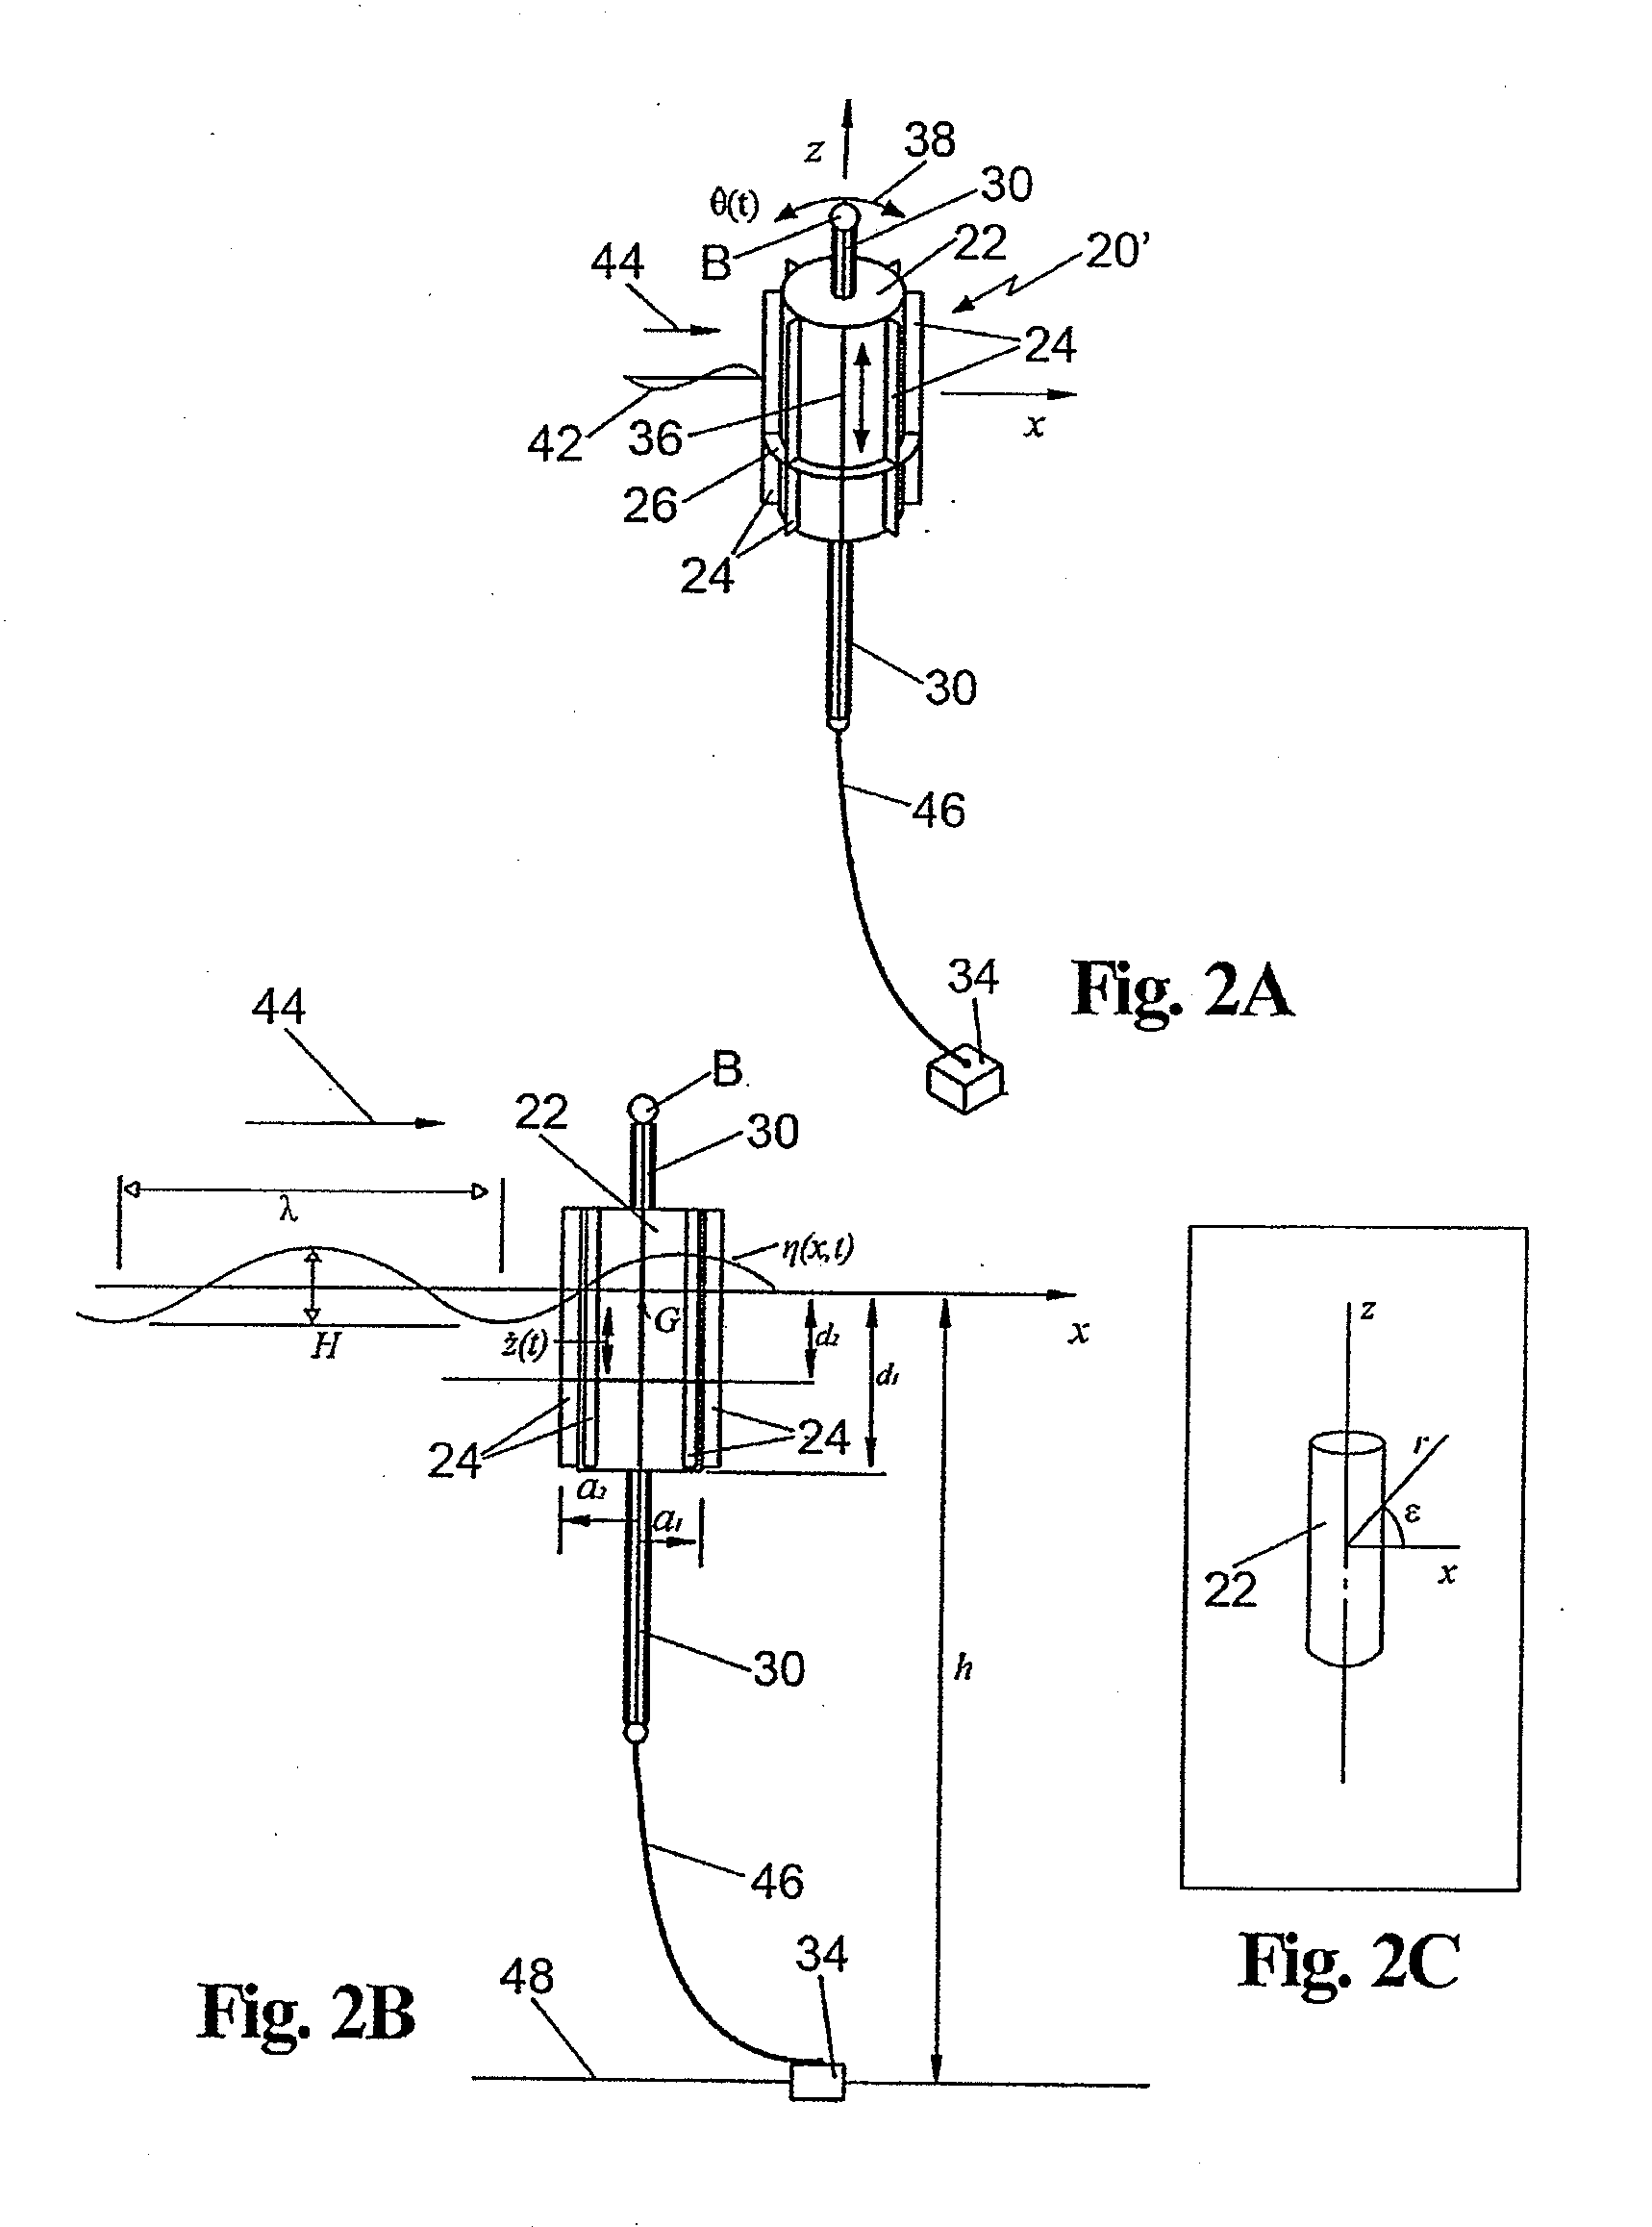 Buoy systems and methods for minimizing beach erosion and other applications for attenuating water surface activity